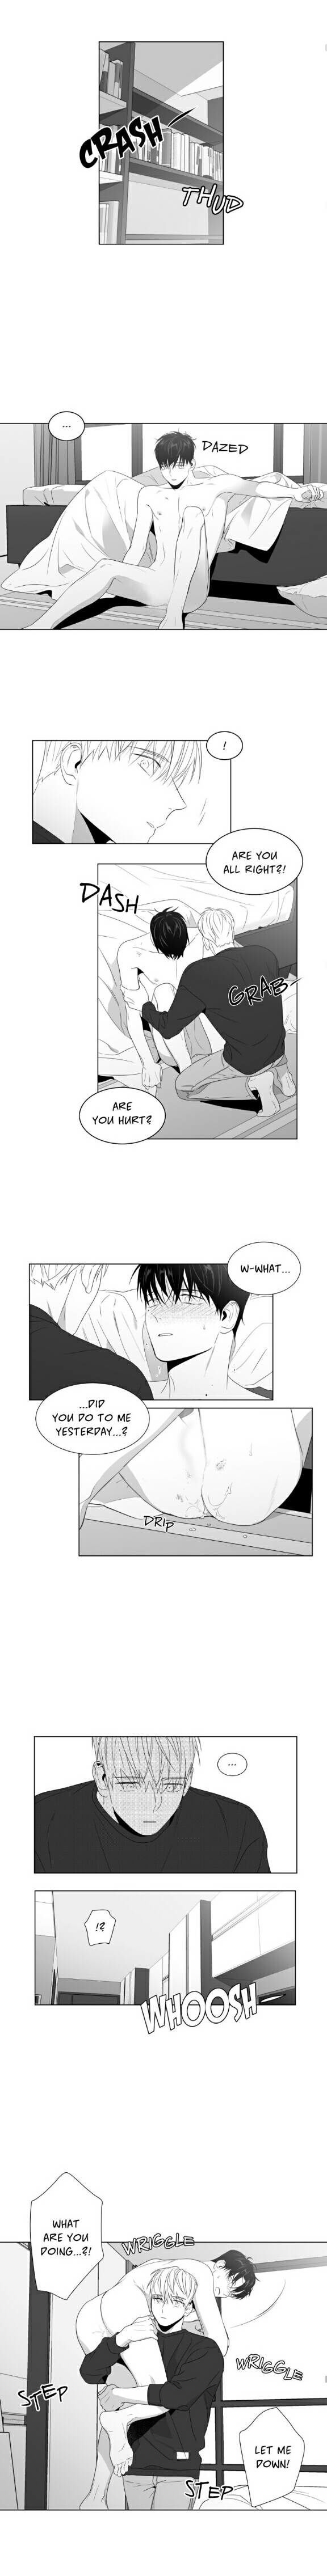 Lover Boy (Lezhin) Chapter 072 page 3